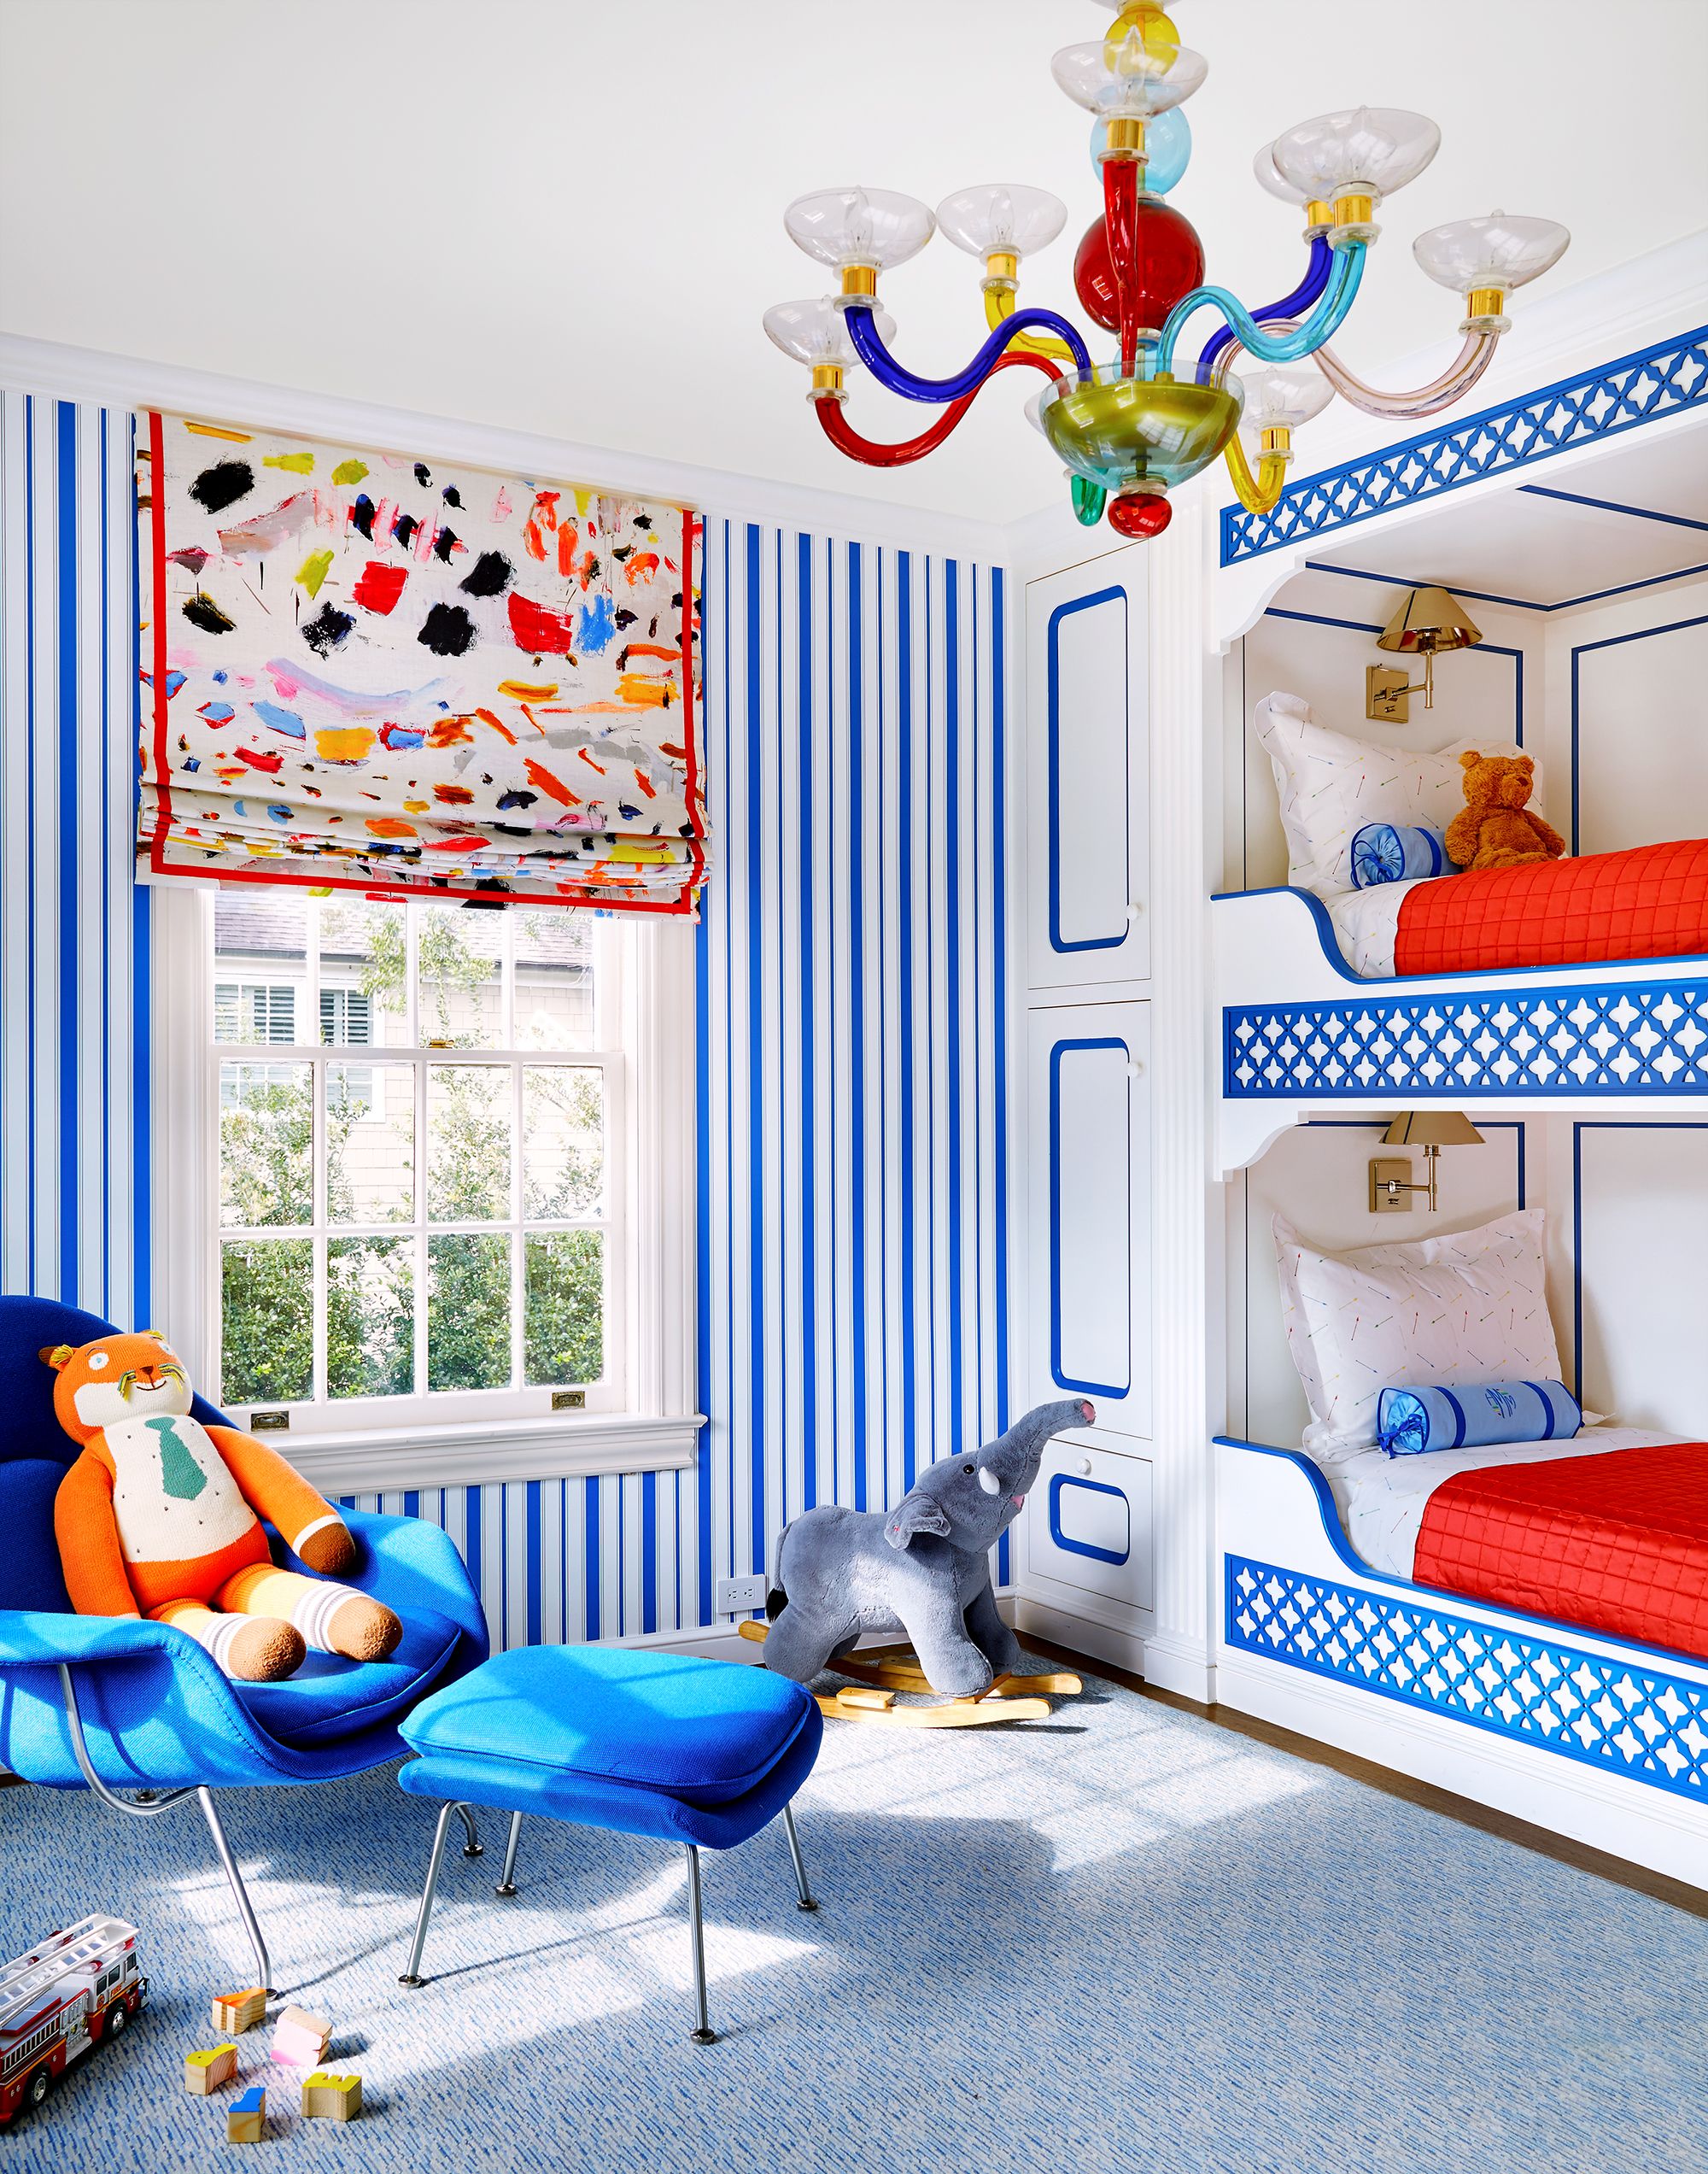 63 Kids' Room Design Ideas - Cool Kids' Bedroom Decor and Style